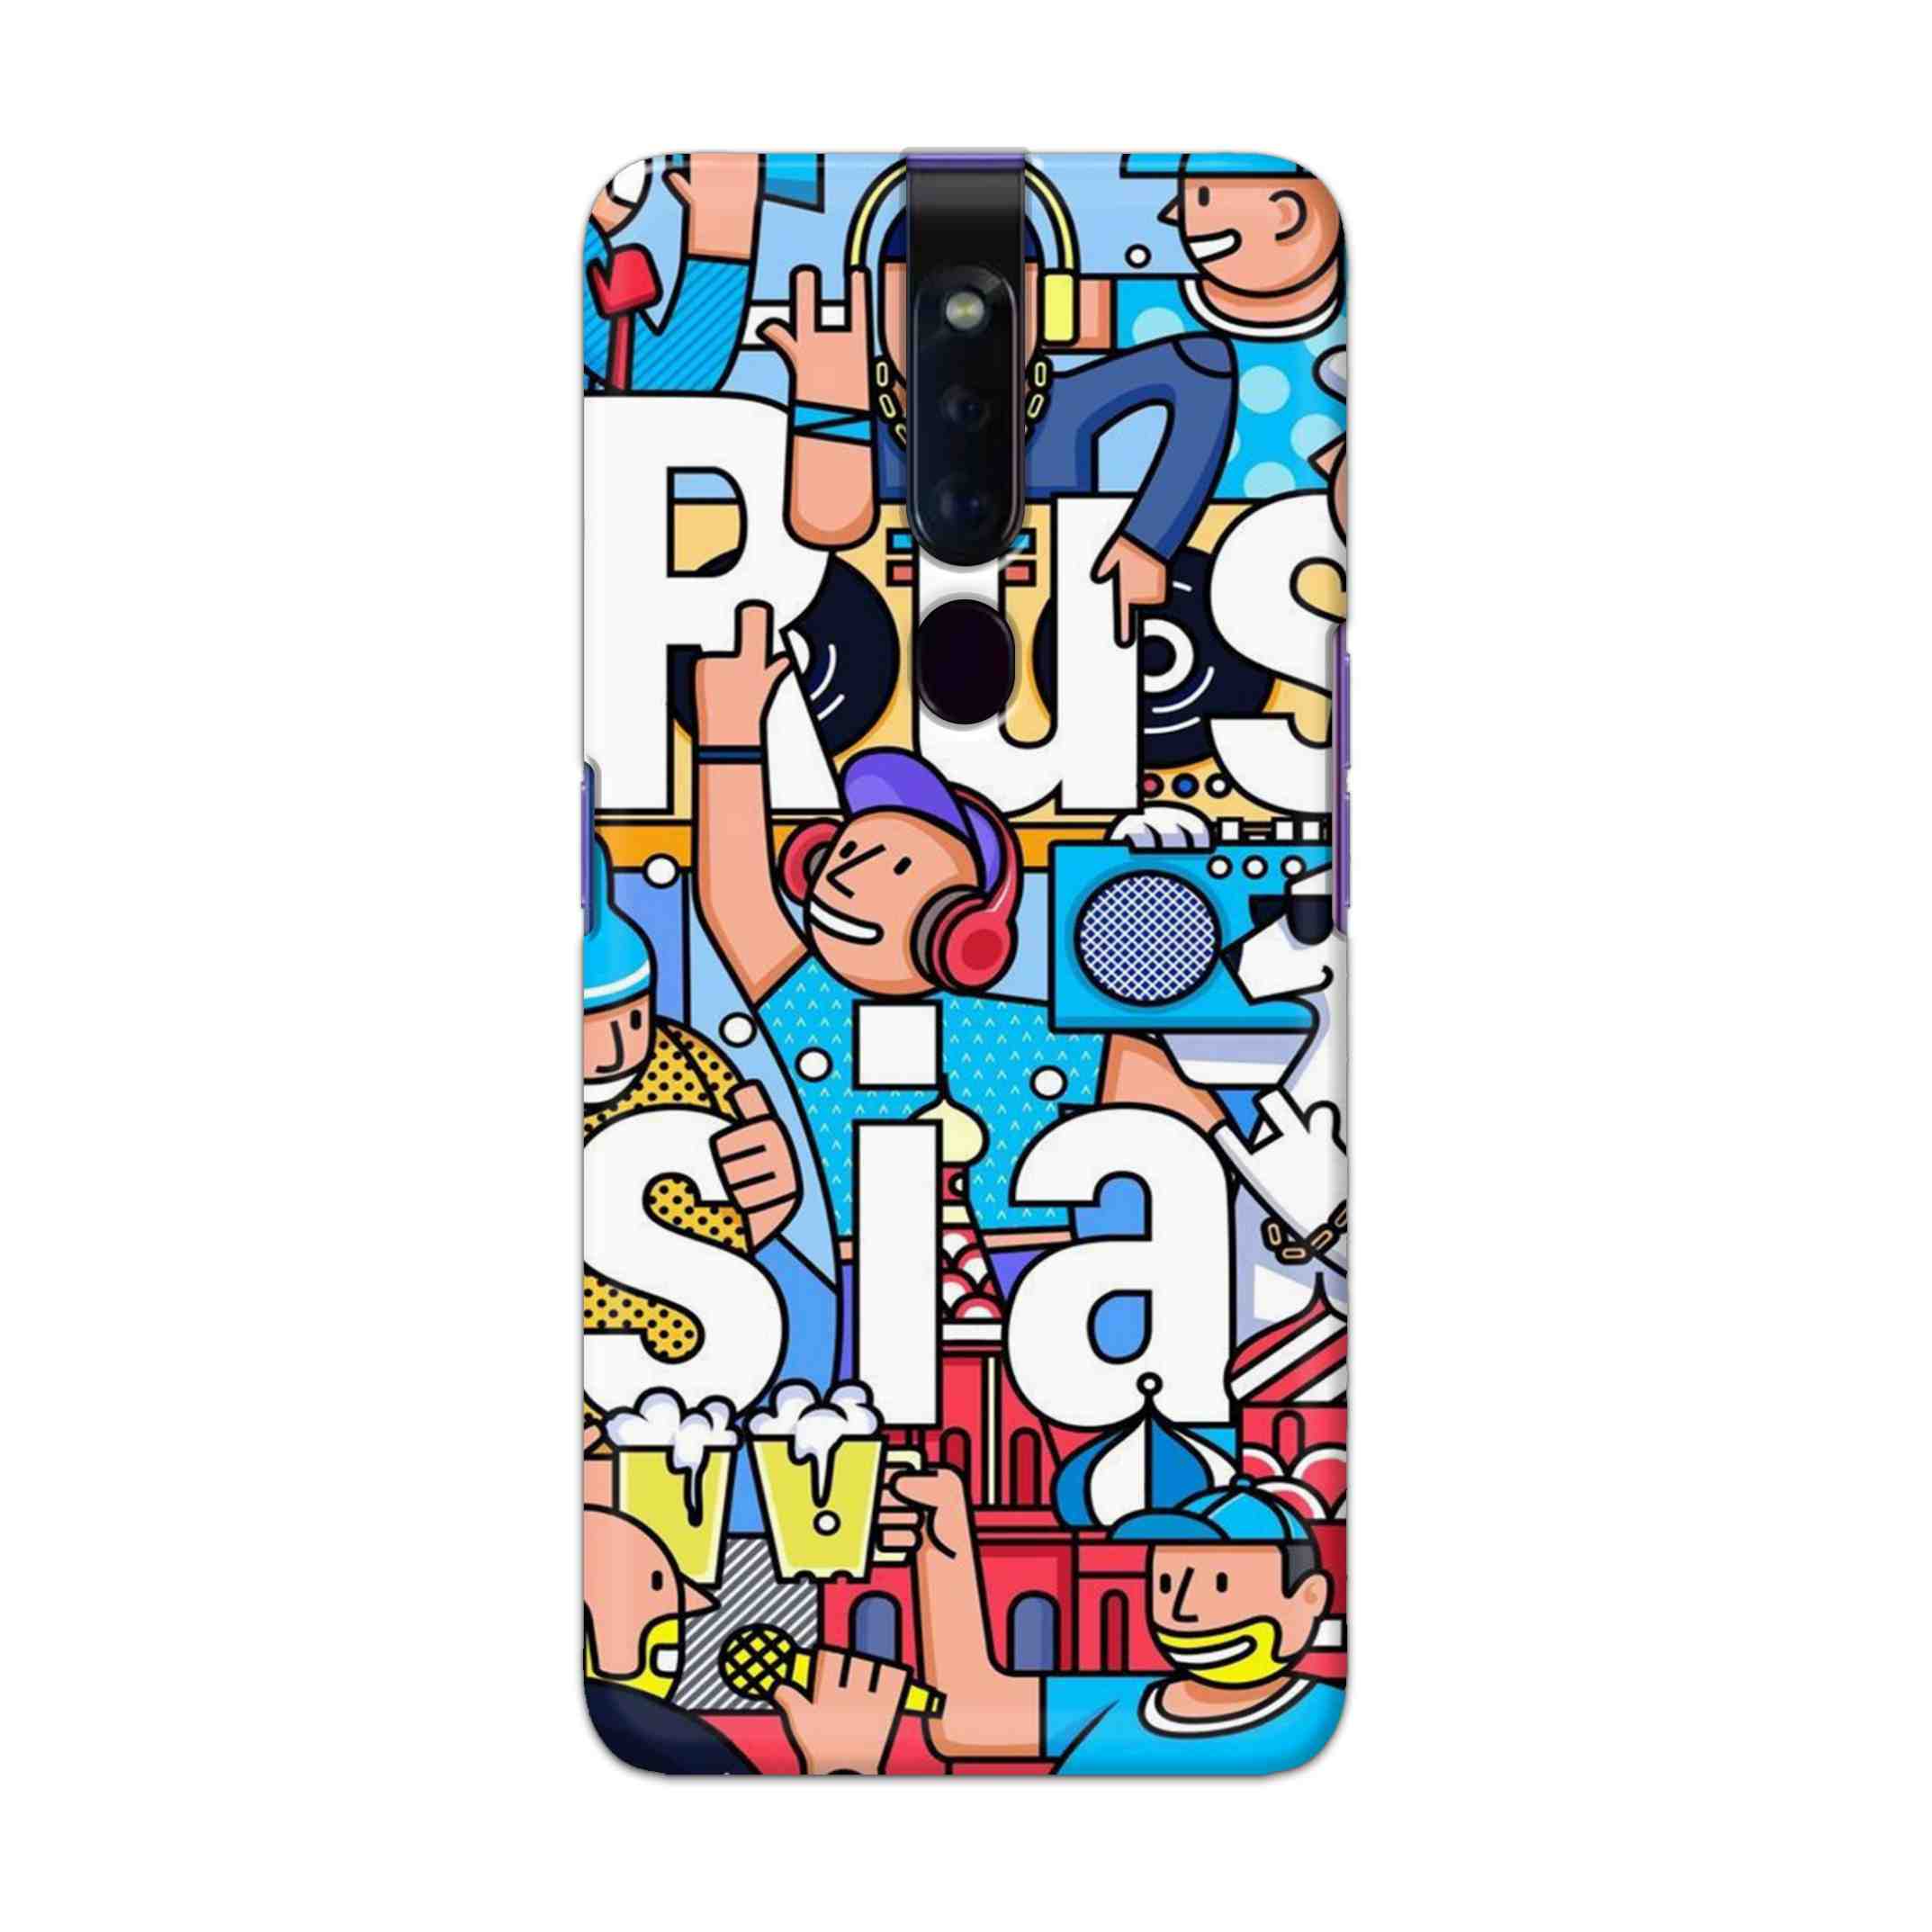 Buy Russia Hard Back Mobile Phone Case Cover For Oppo F11 Pro Online